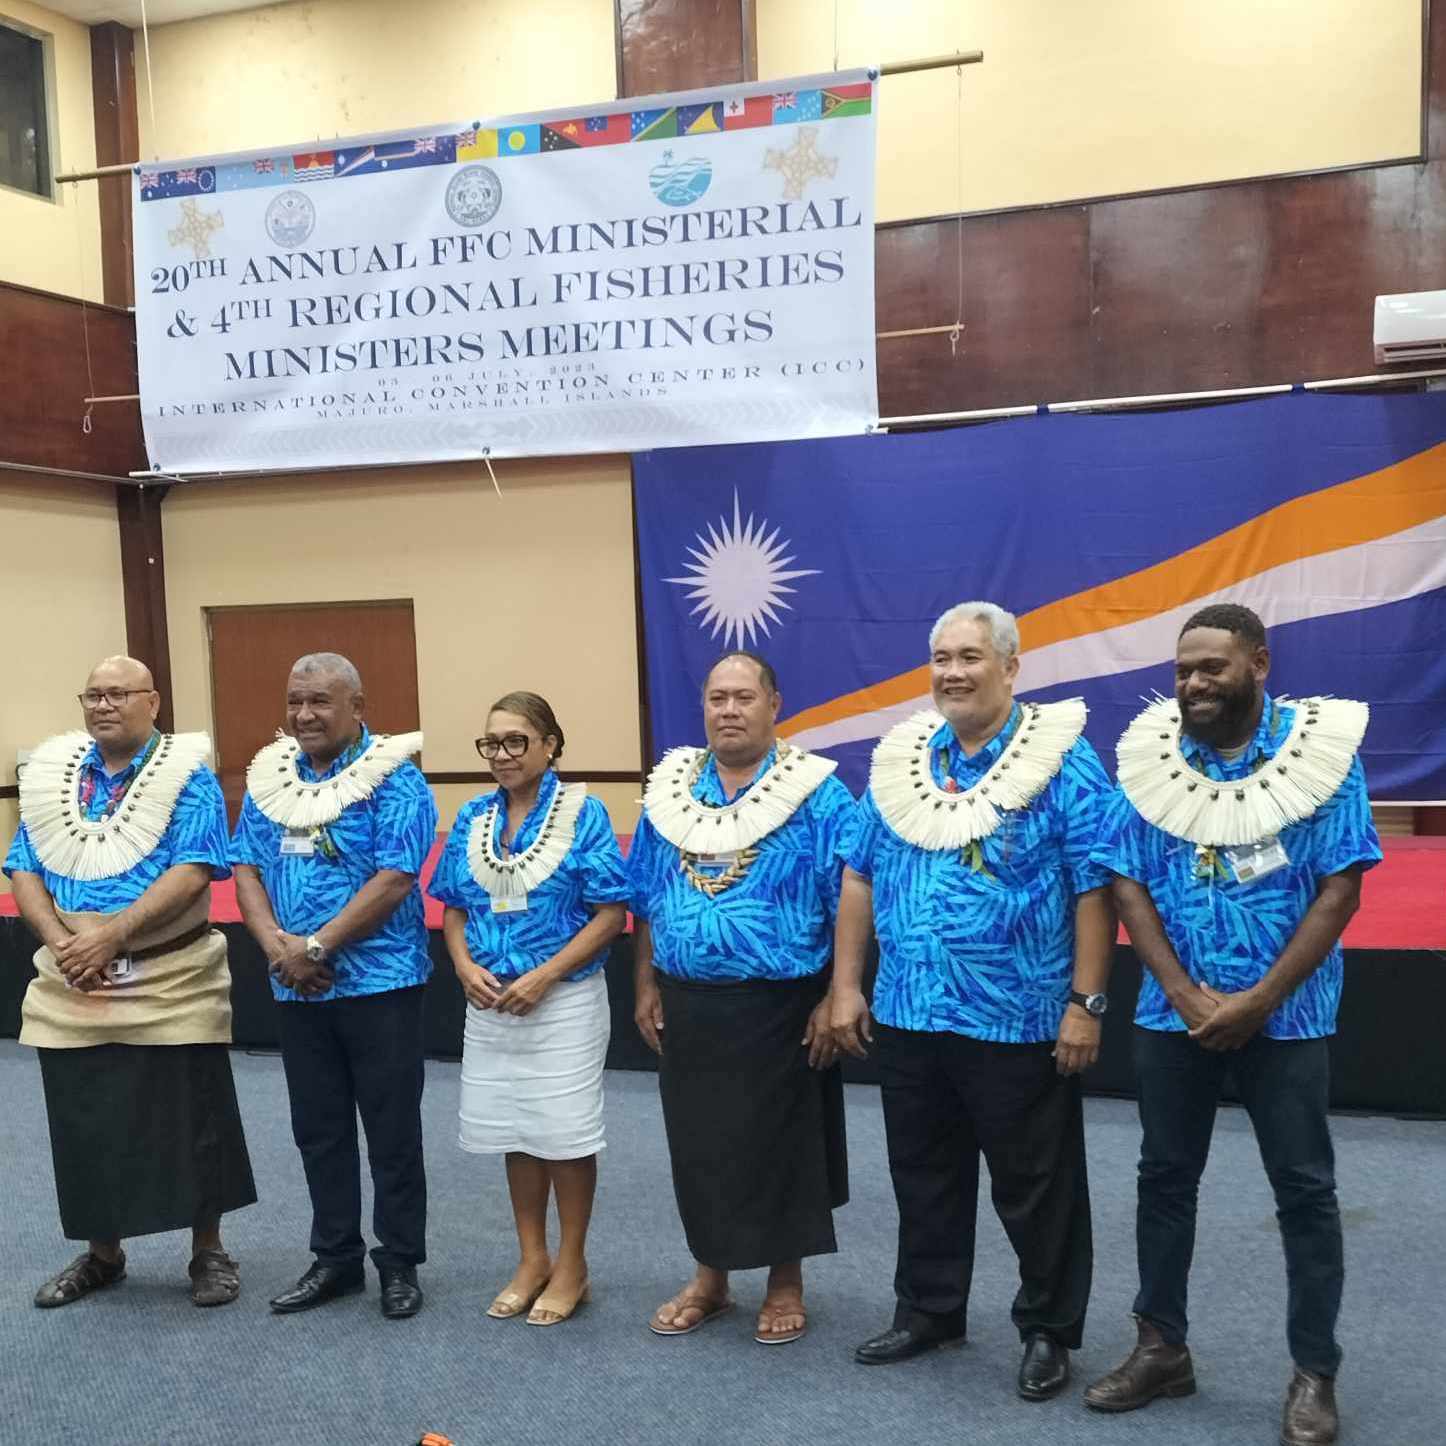 Cook Islands to work with other Pacific Island nations to sustainably use fisheries